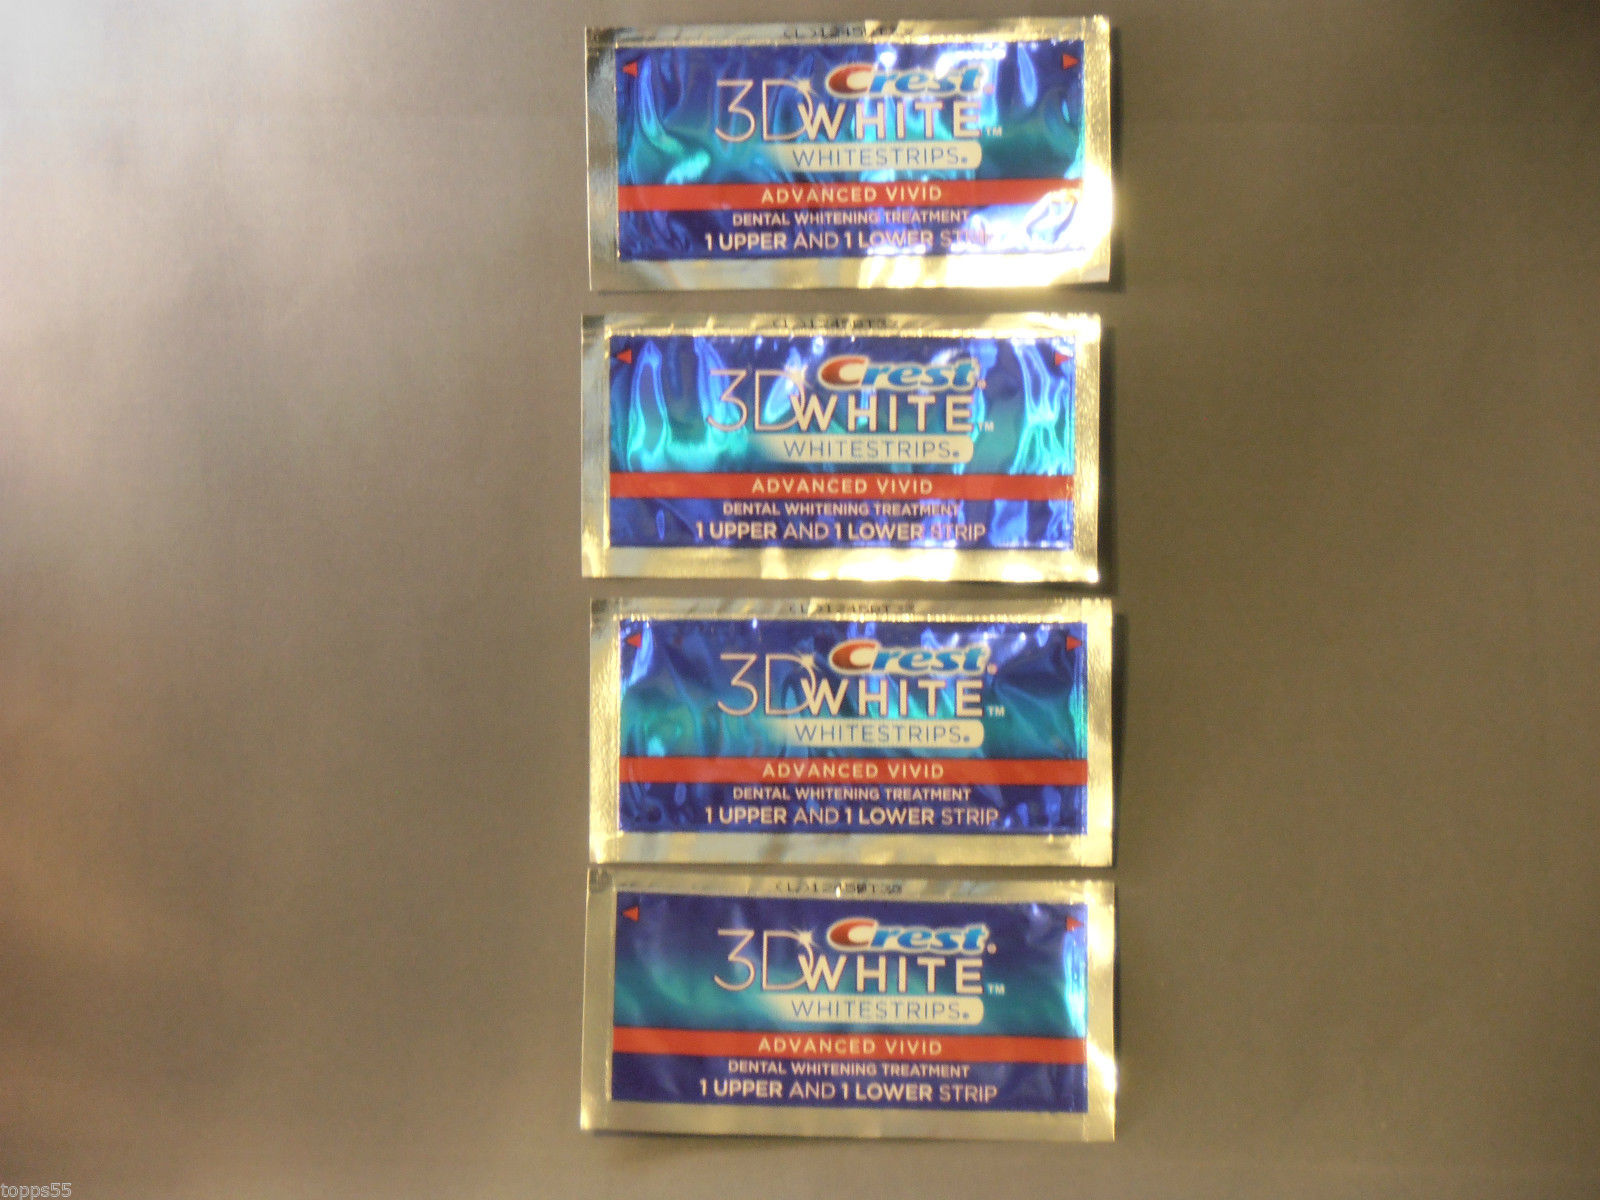 New Crest 3D Dental Whitestrips Advanced Vivid 8 Whitening Strips in 4 Pouches -- US Delivery